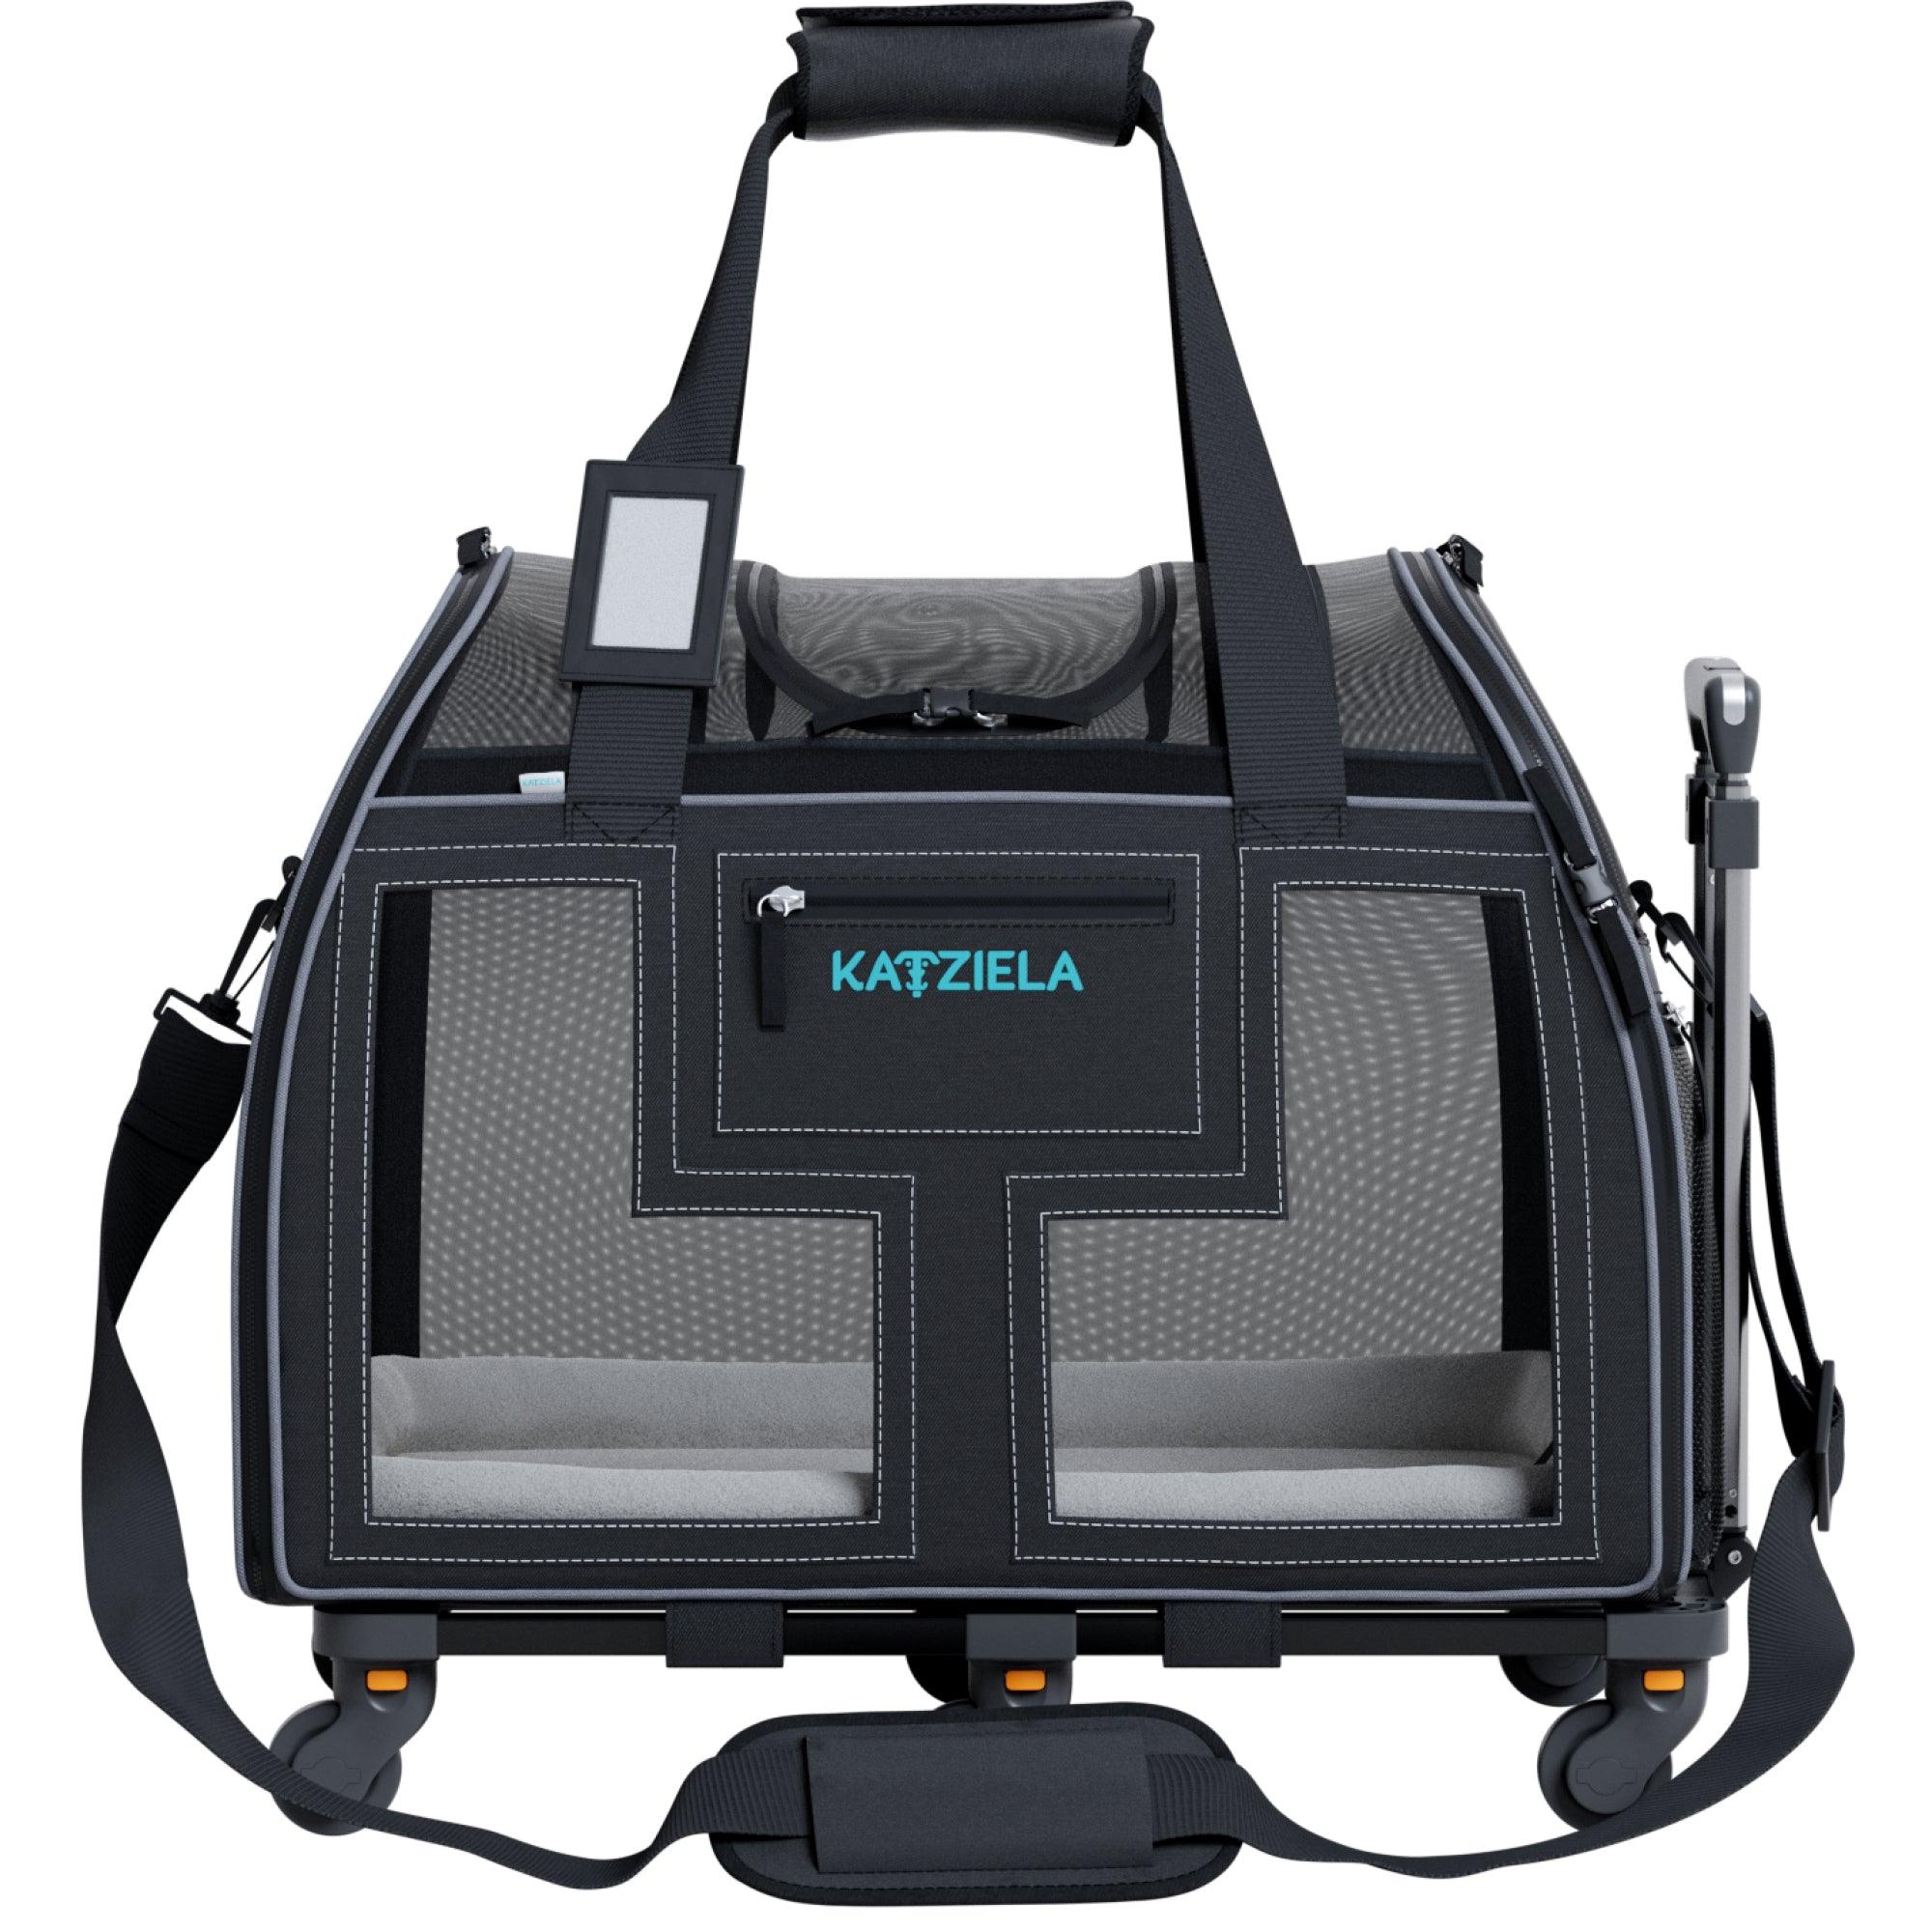 Luxury Lorry™ Pet Carrier with Removable Wheels and Telescopic Handle - Katziela